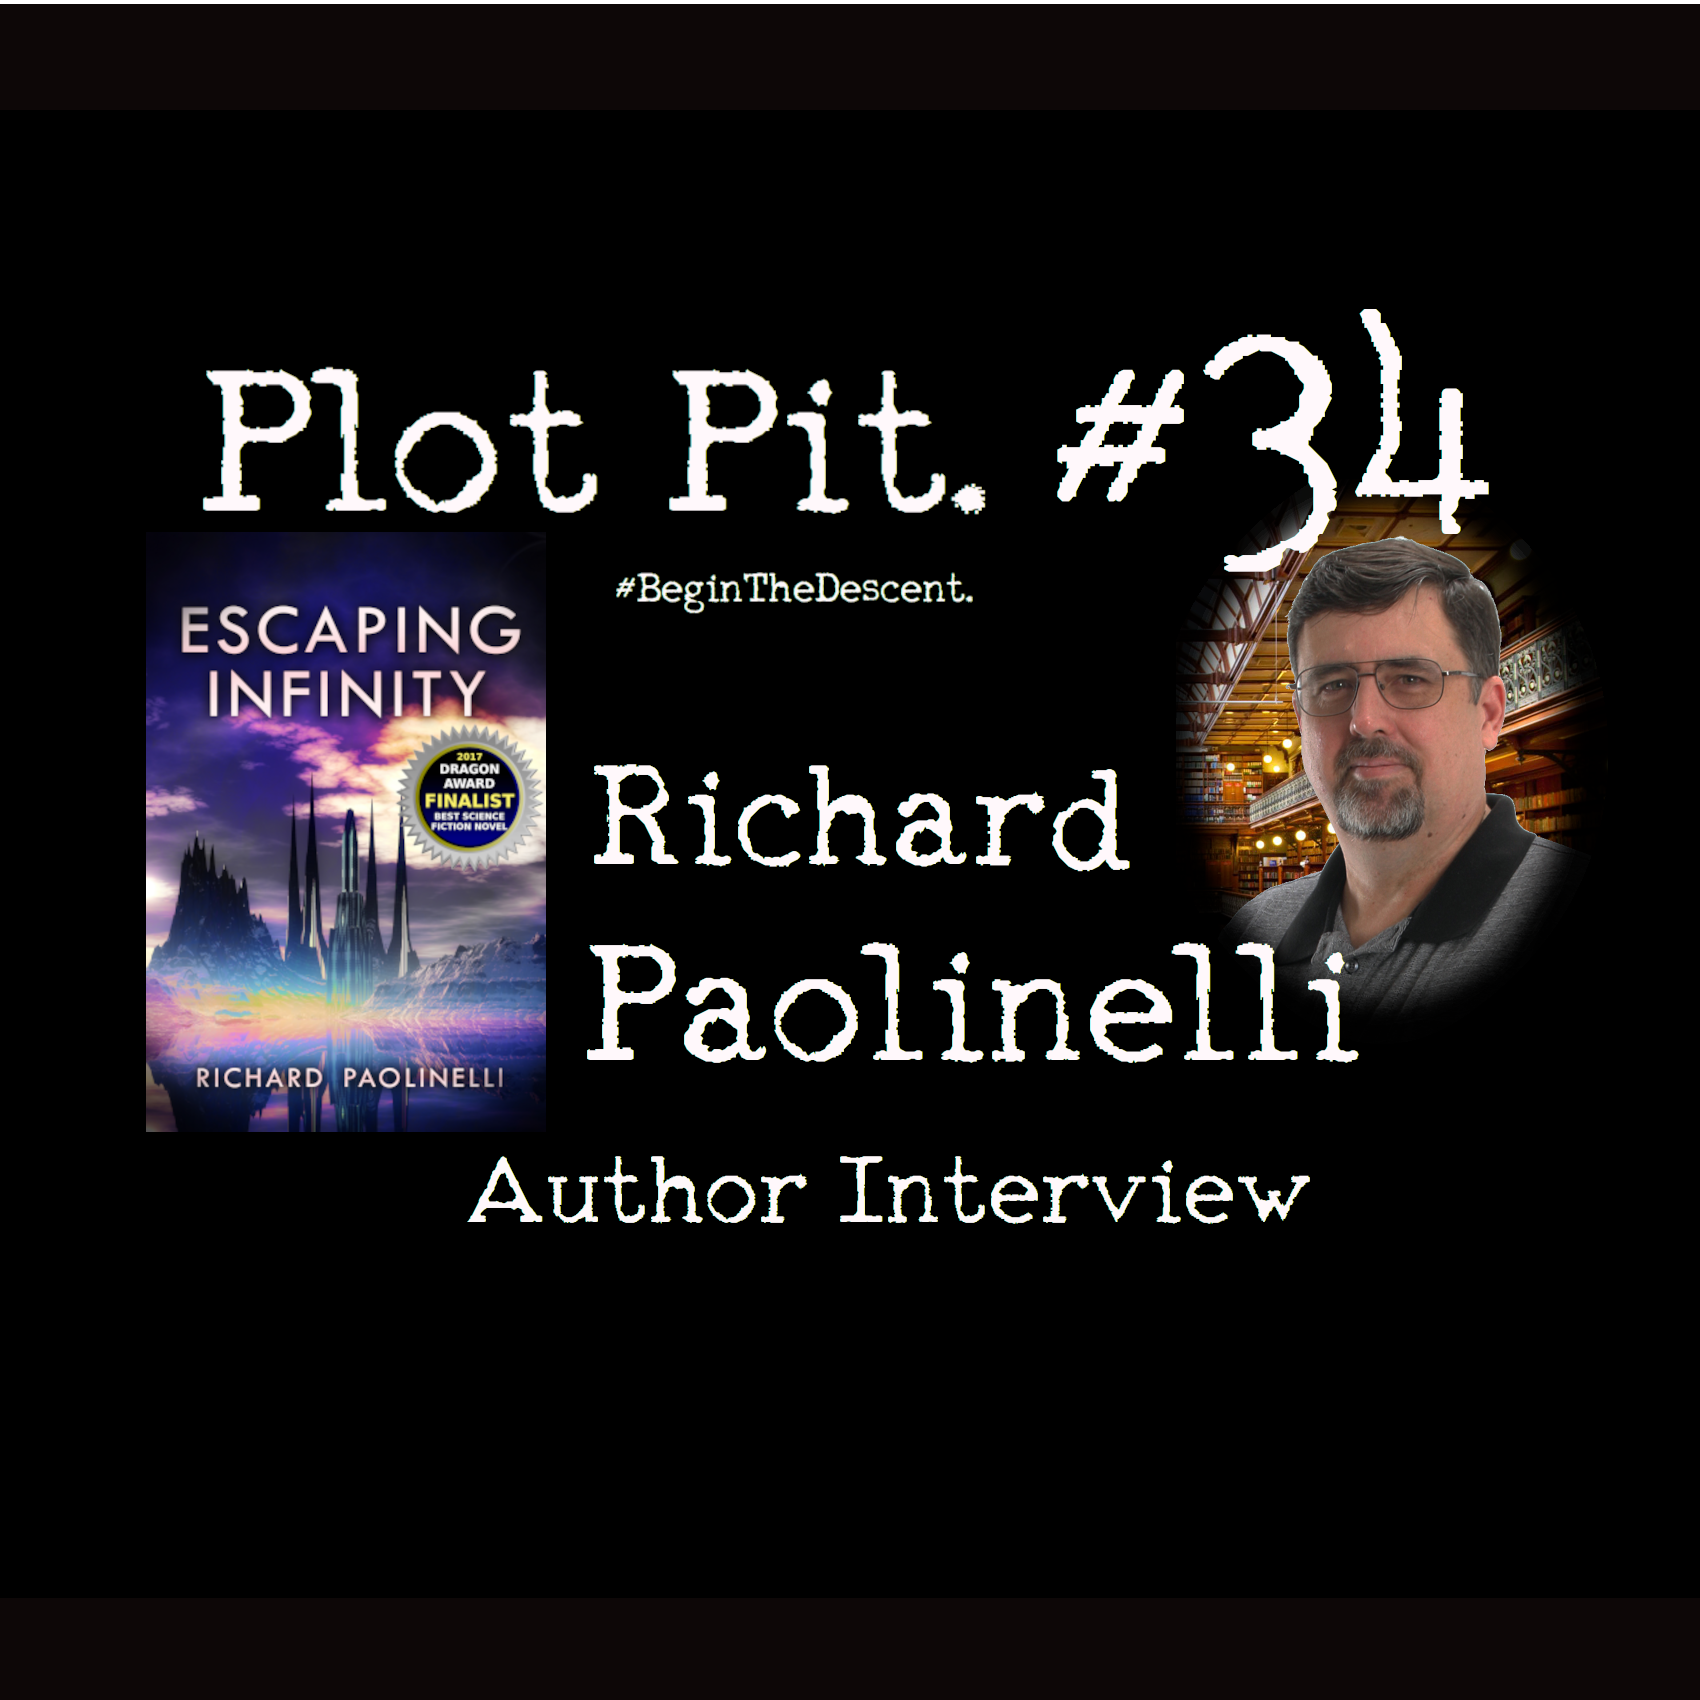 Richard Paolinelli's Author Interview